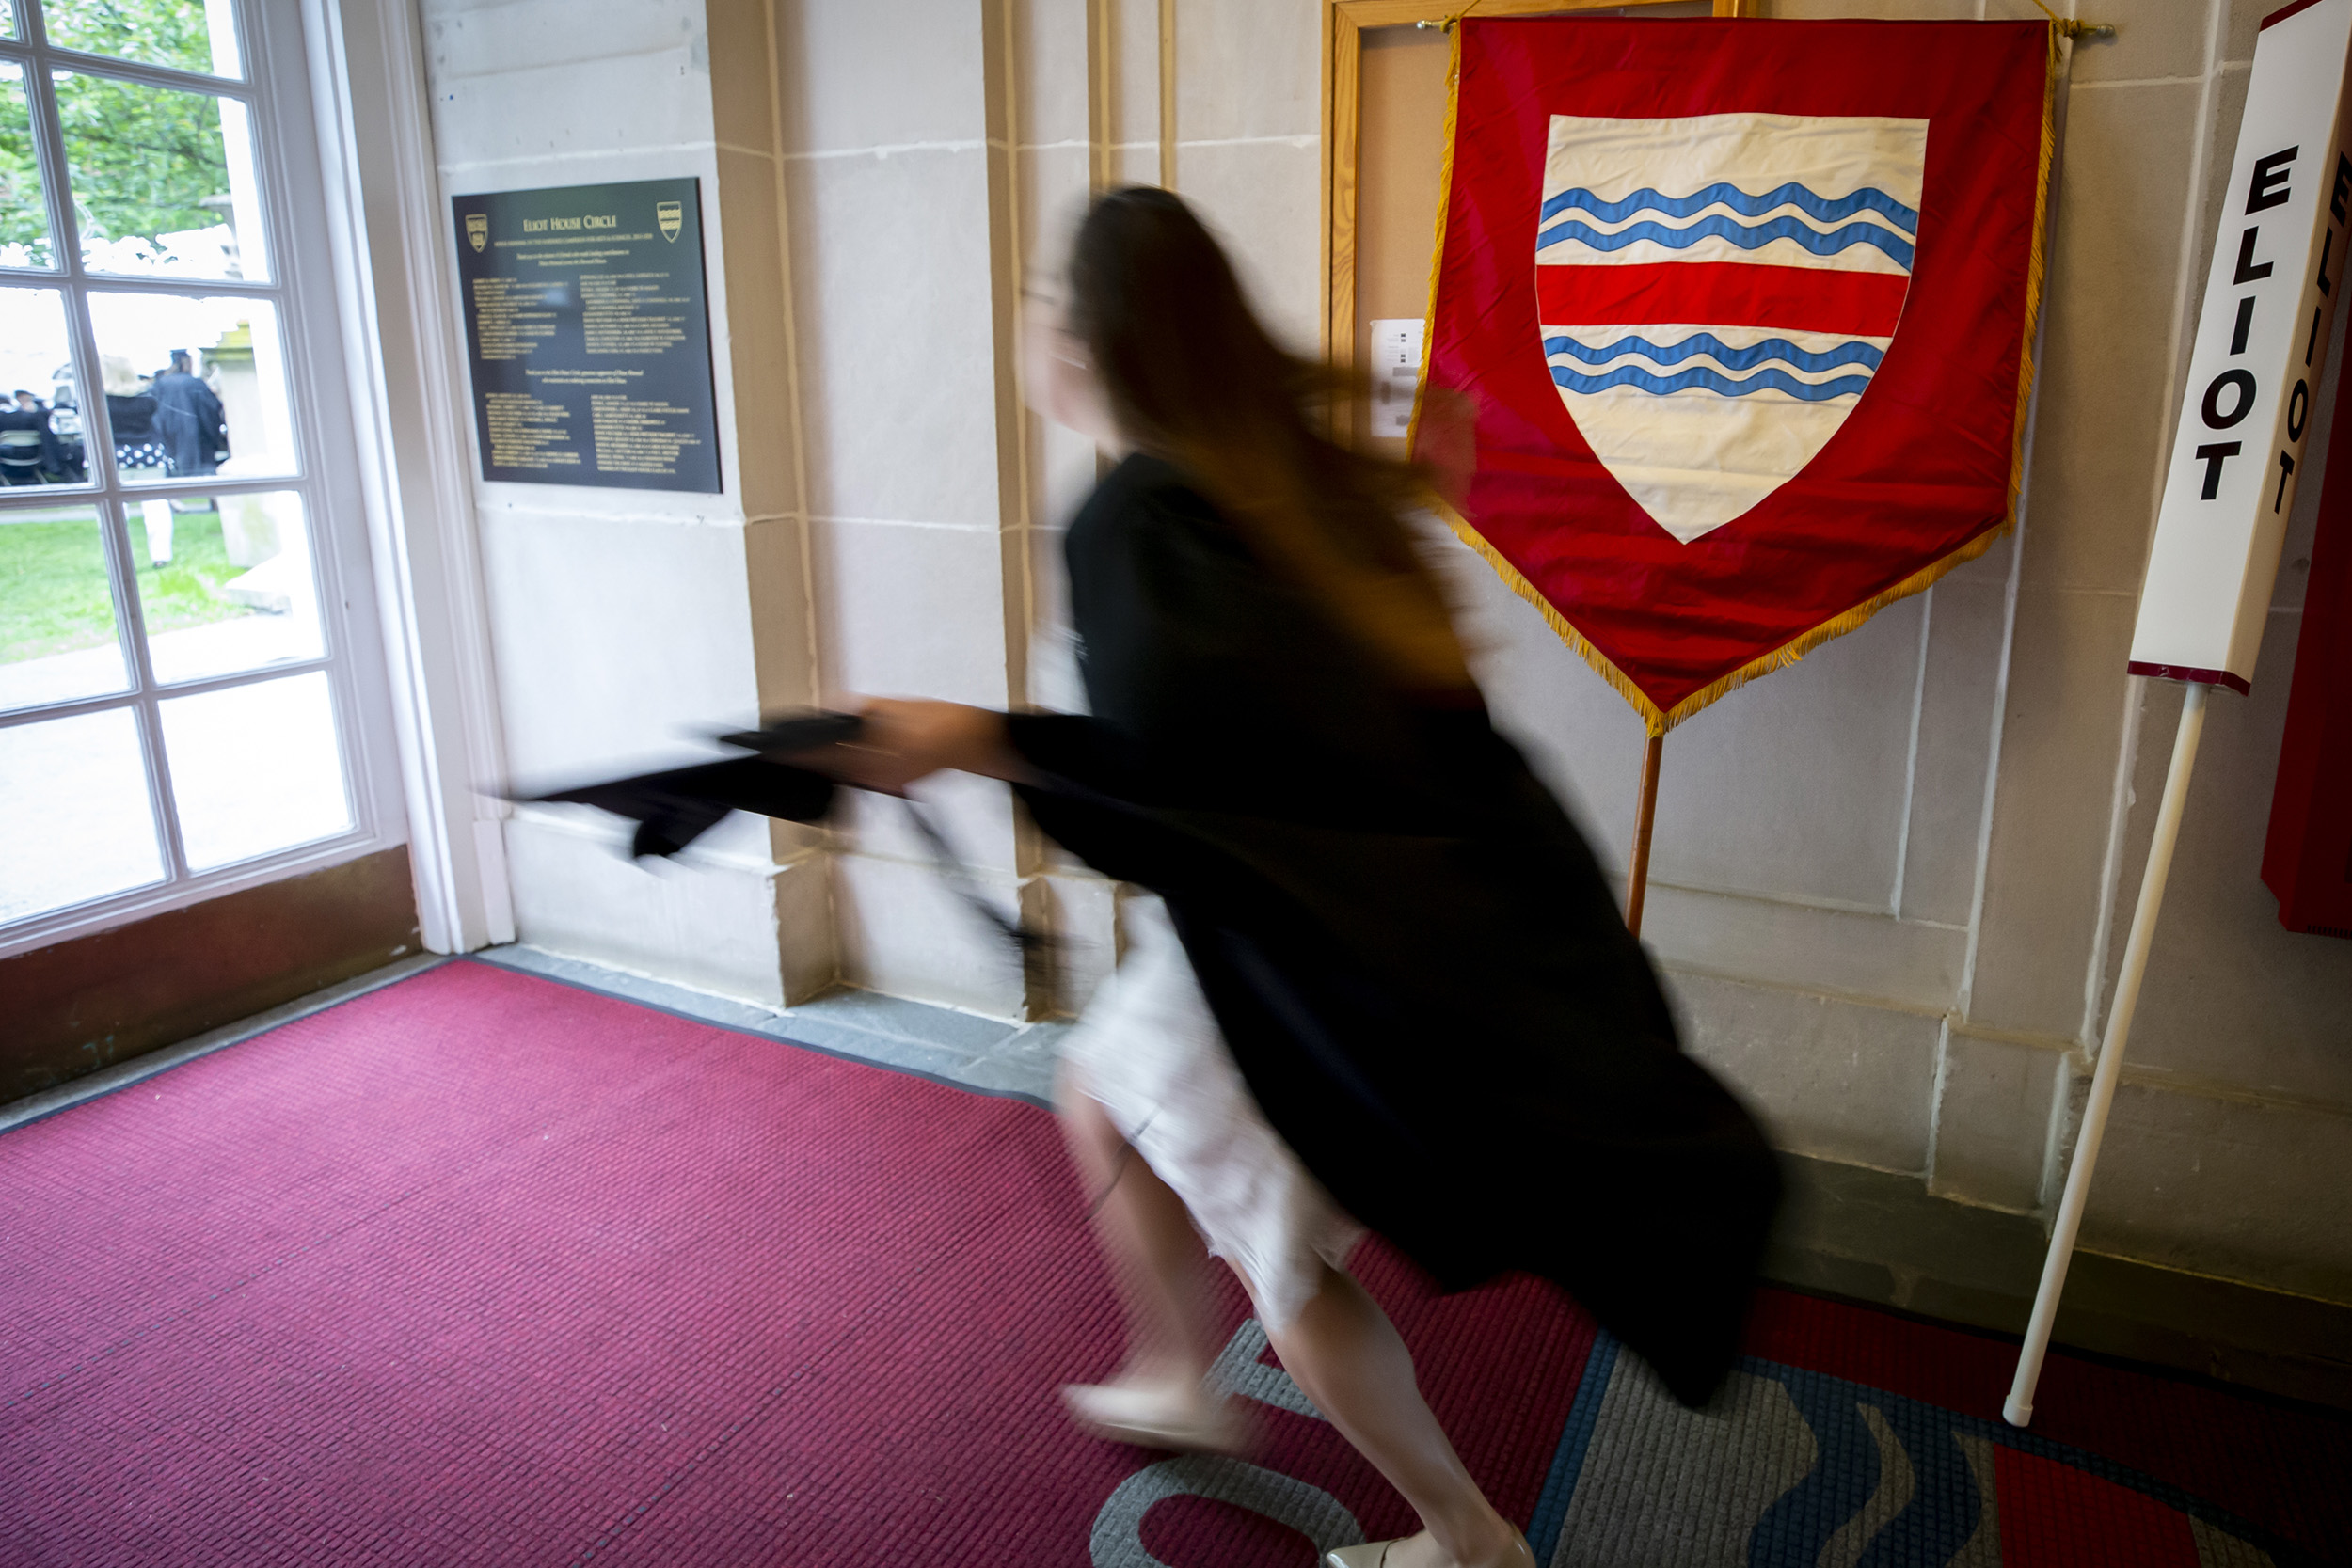 A students runs past an Elliot House shield on Commencement Day.